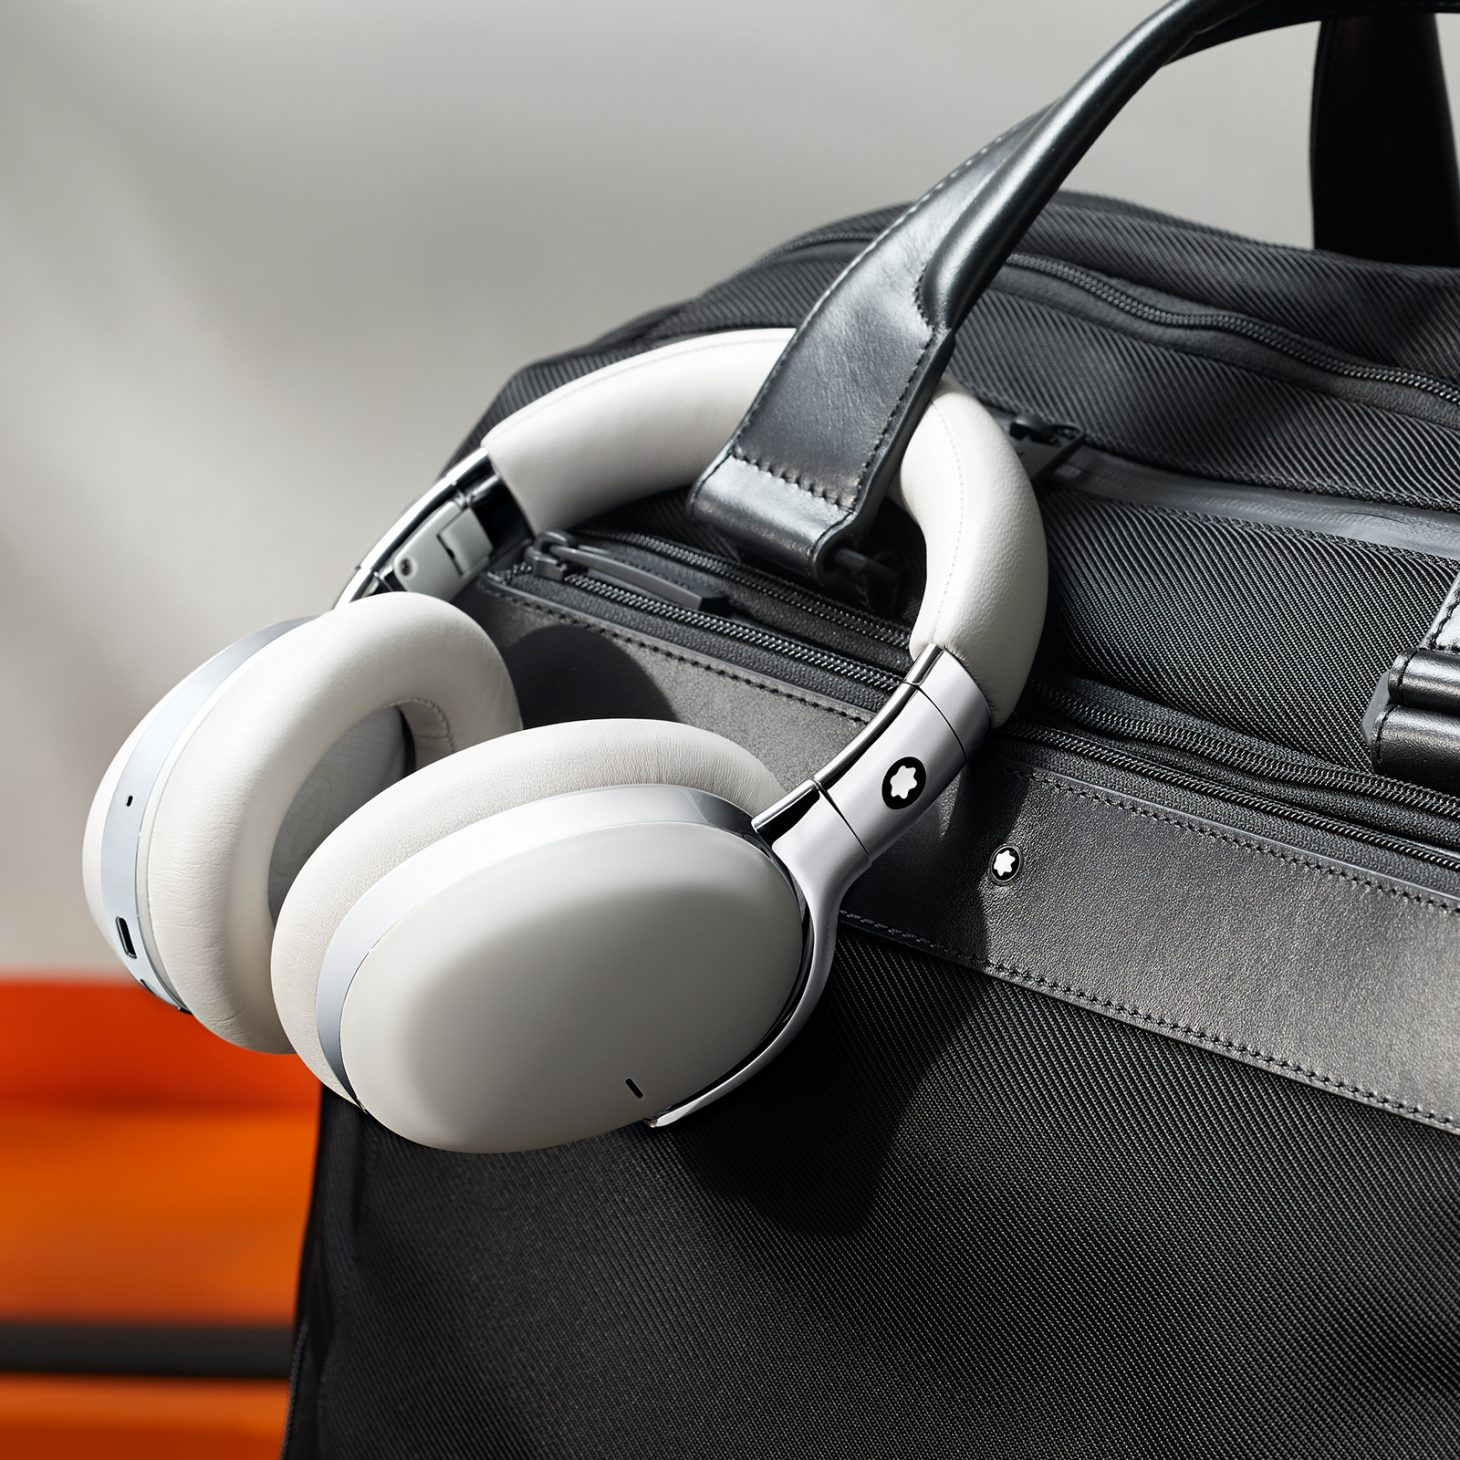 Montblanc reveal new collection of Smart Headphones. Wallpaper*